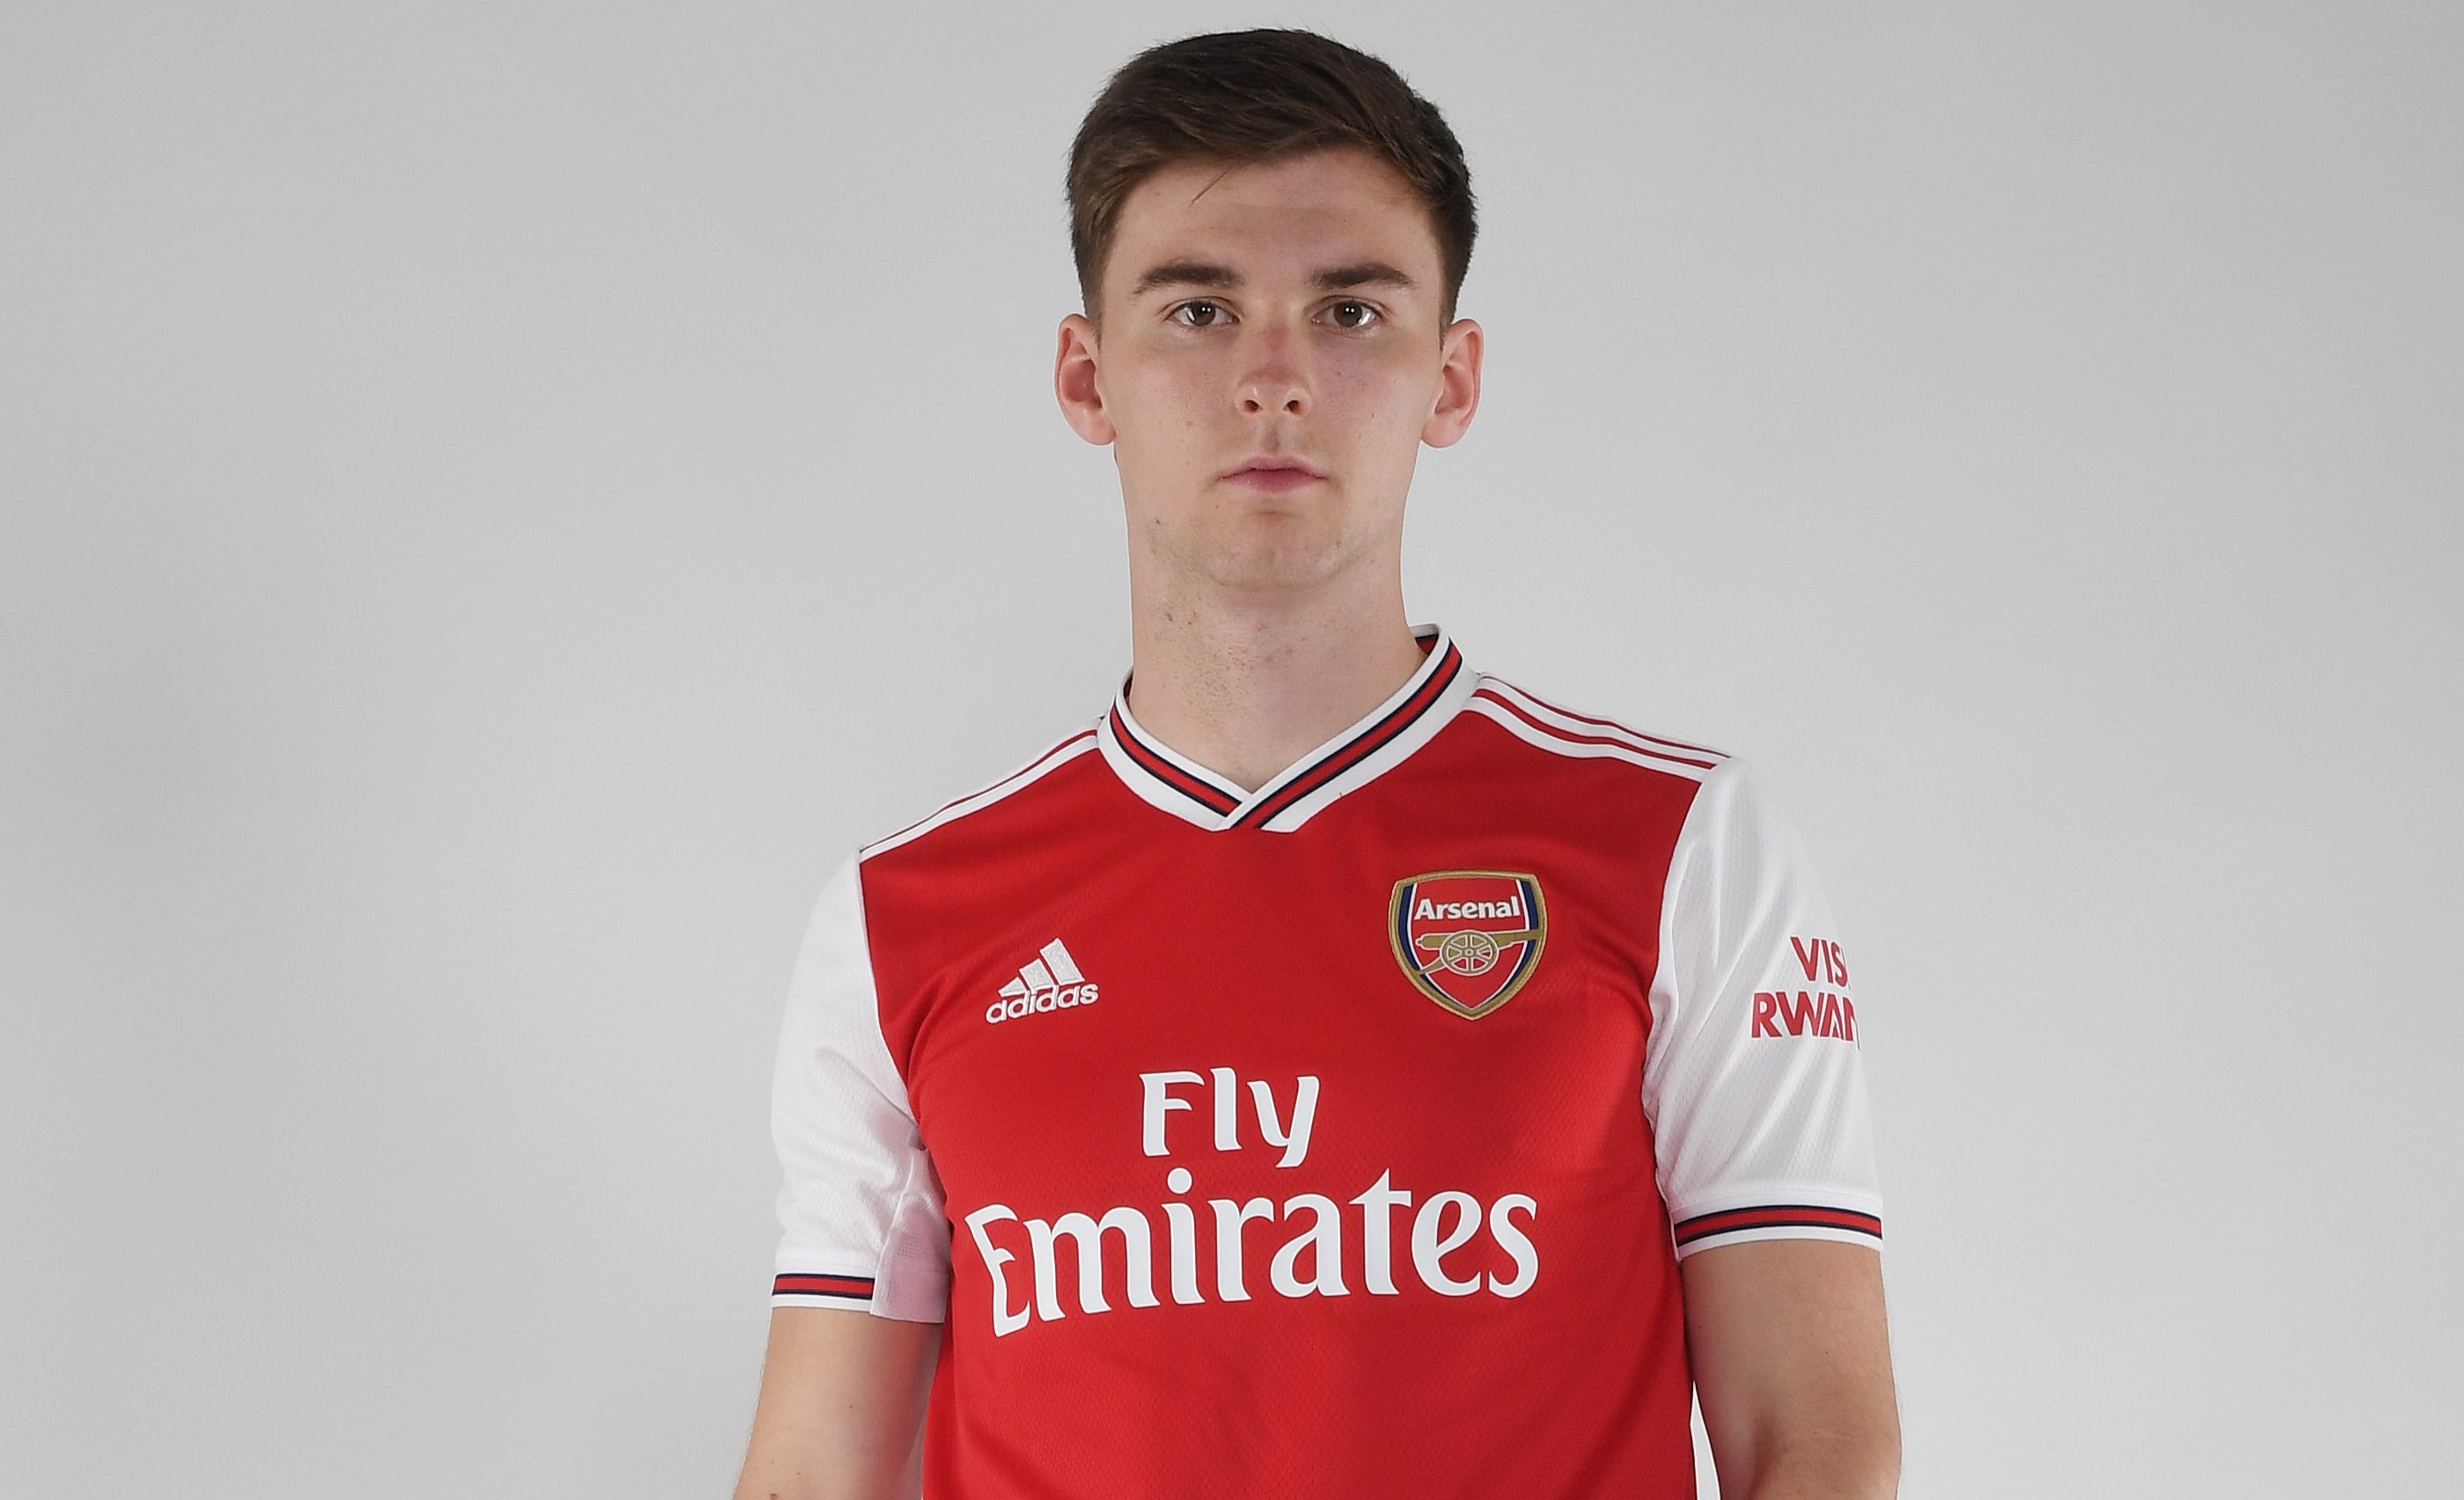 Kieran Tierney completed his move from Celtic to Arsenal on Thursday